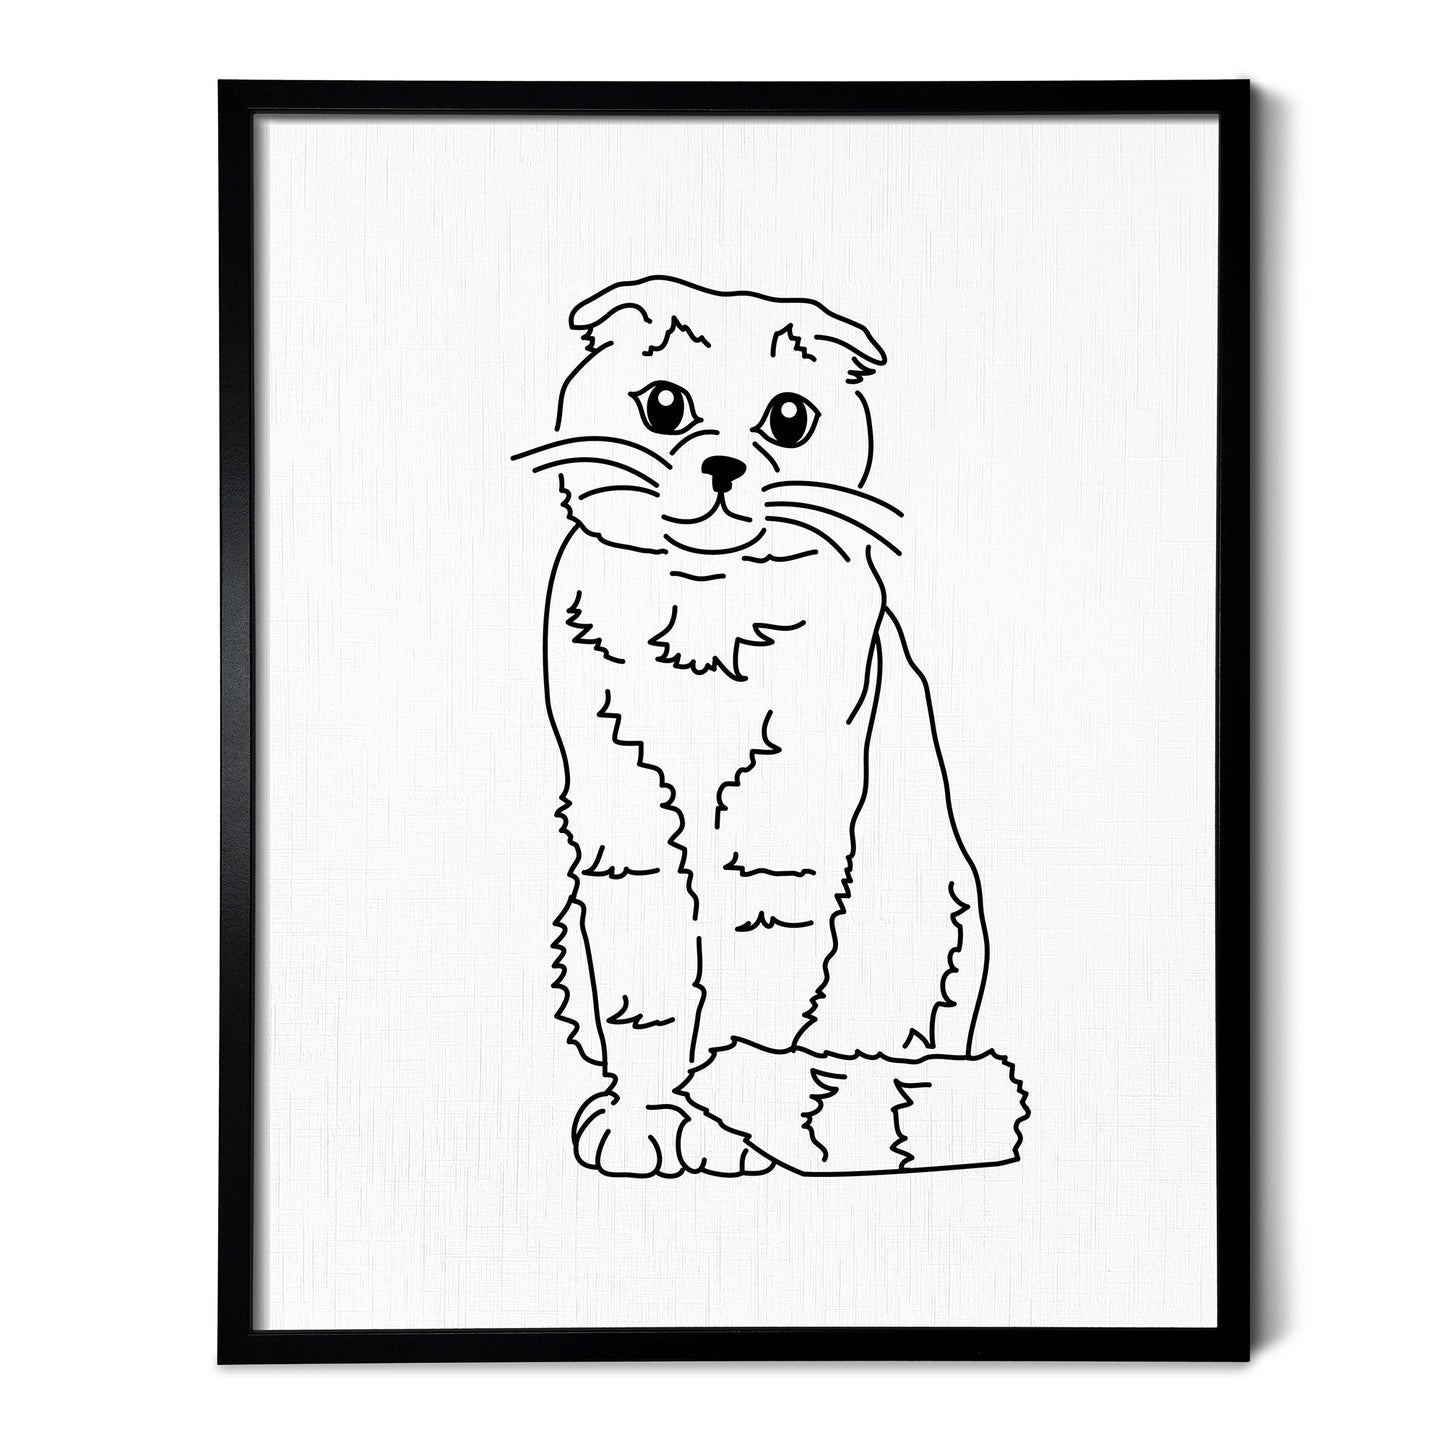 A line art drawing of a Scottish Fold cat on white linen paper in a thin black picture frame